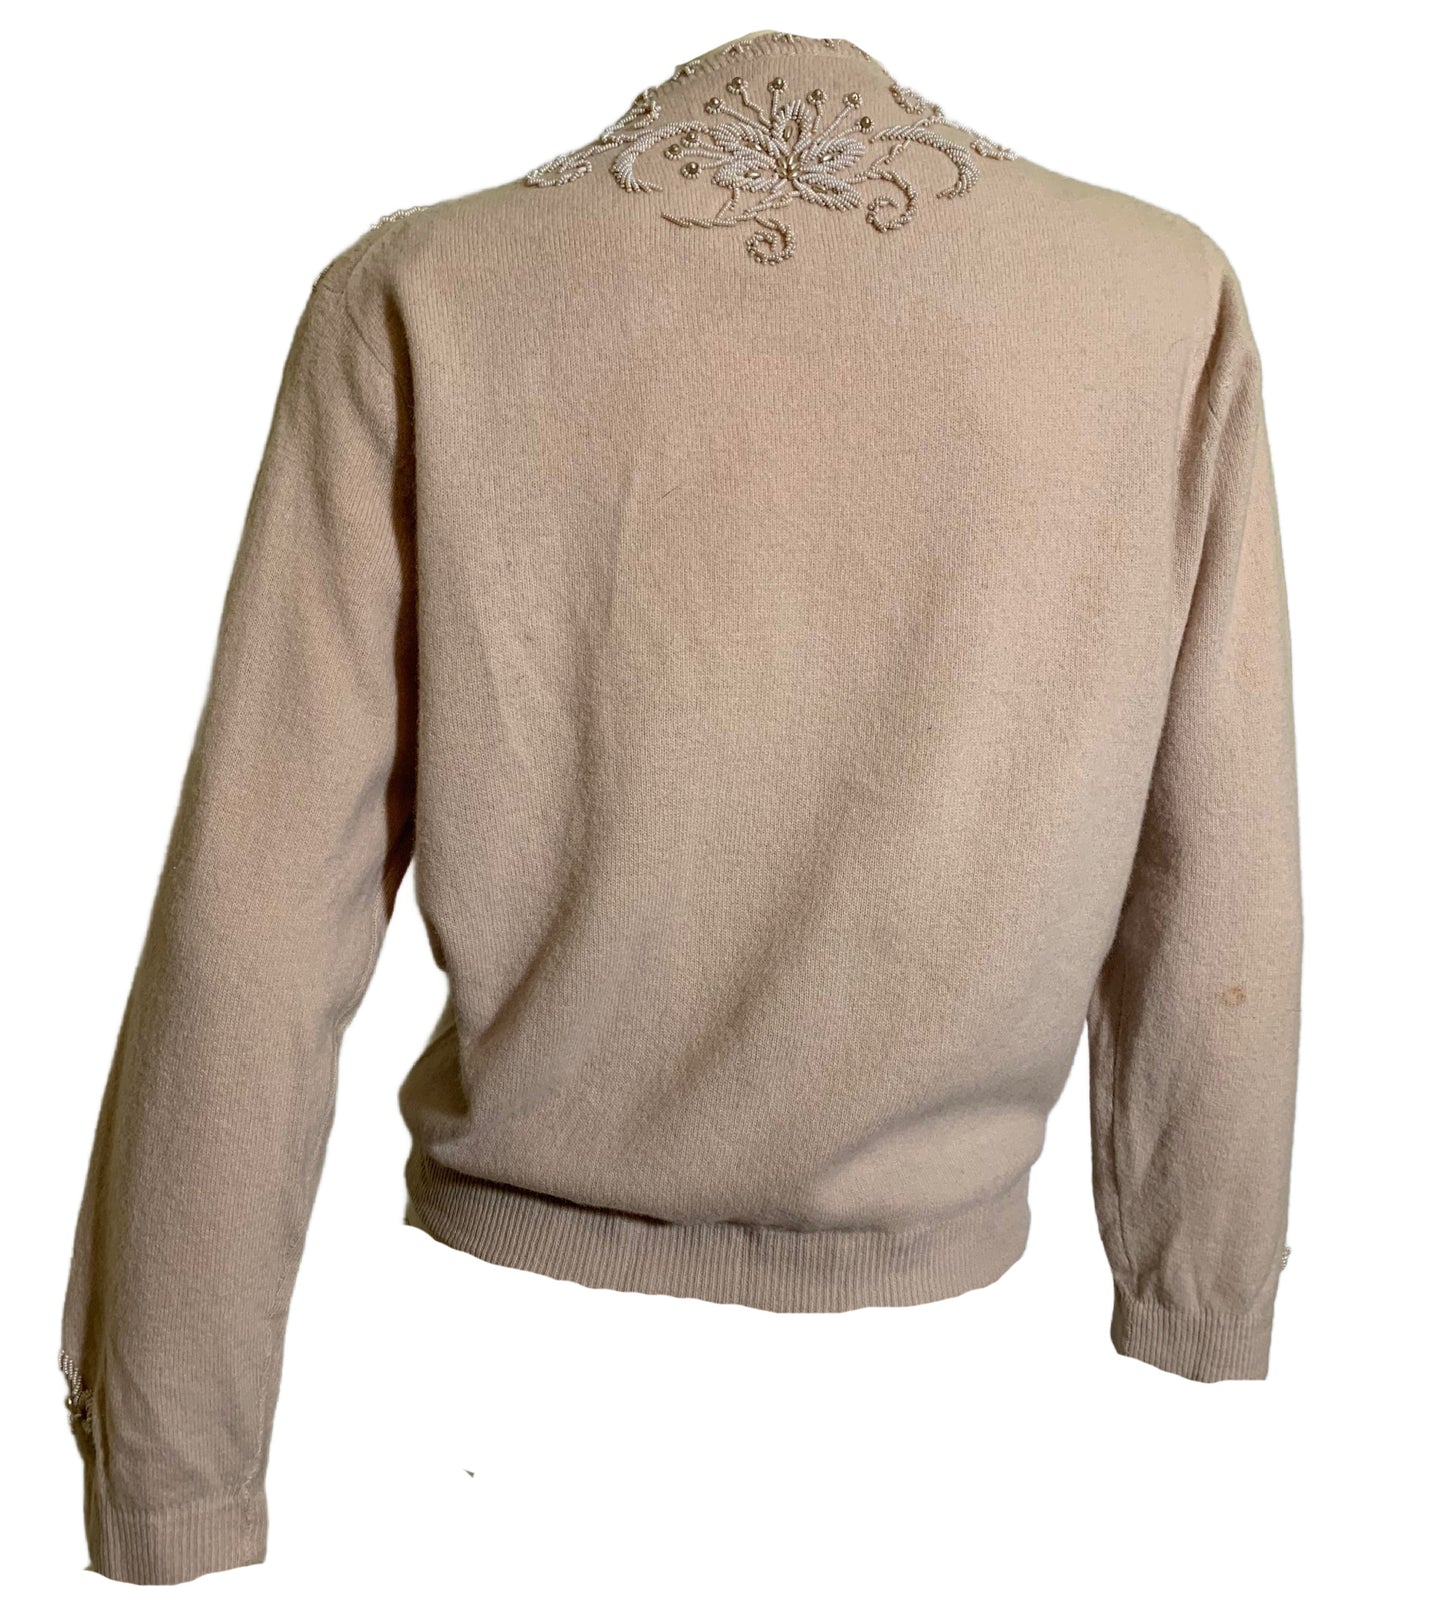 Oyster Cashmere Faux Pearl Beaded Button Front Cardigan Sweater circa 1960s